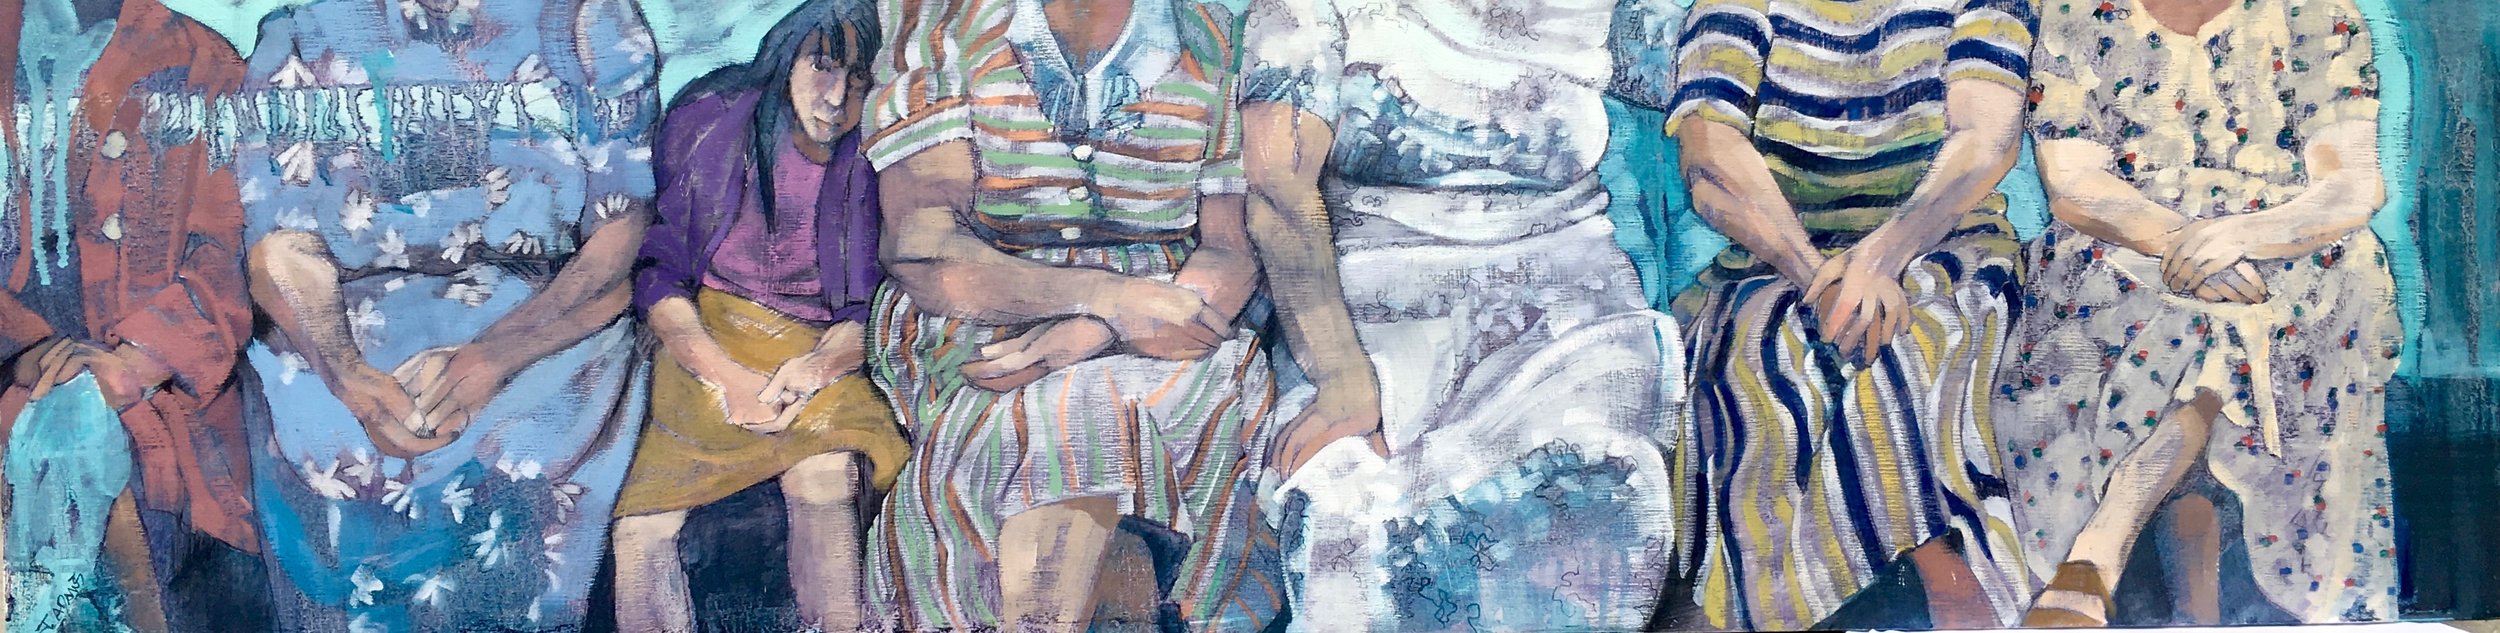  The Aunts  oil on birch panel with unique gray framing device/ 10x38 